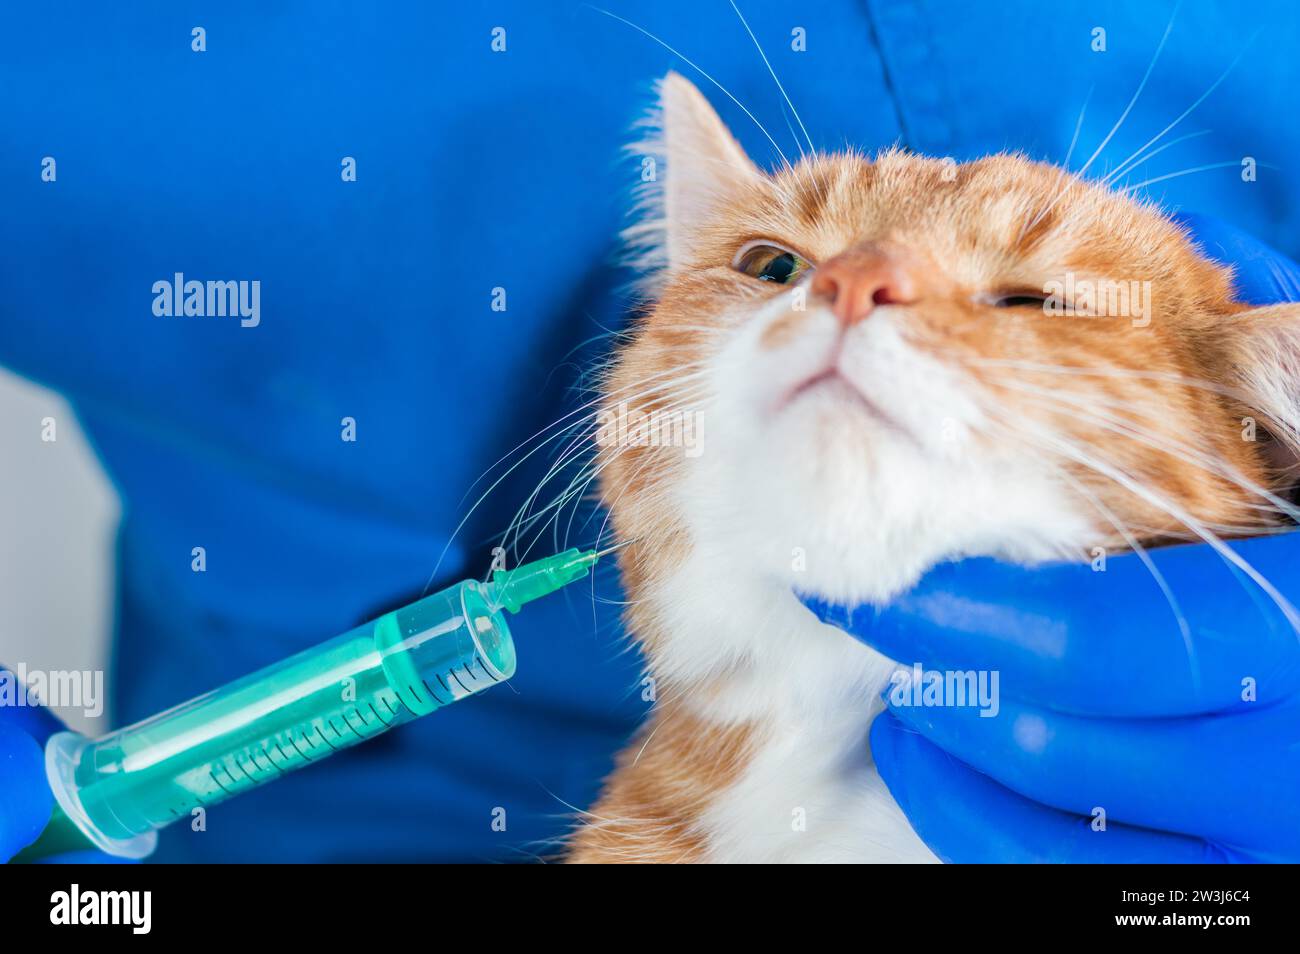 Image of a ginger cat at the time of vaccination. Veterinary medicine concept. Mixed media Stock Photo